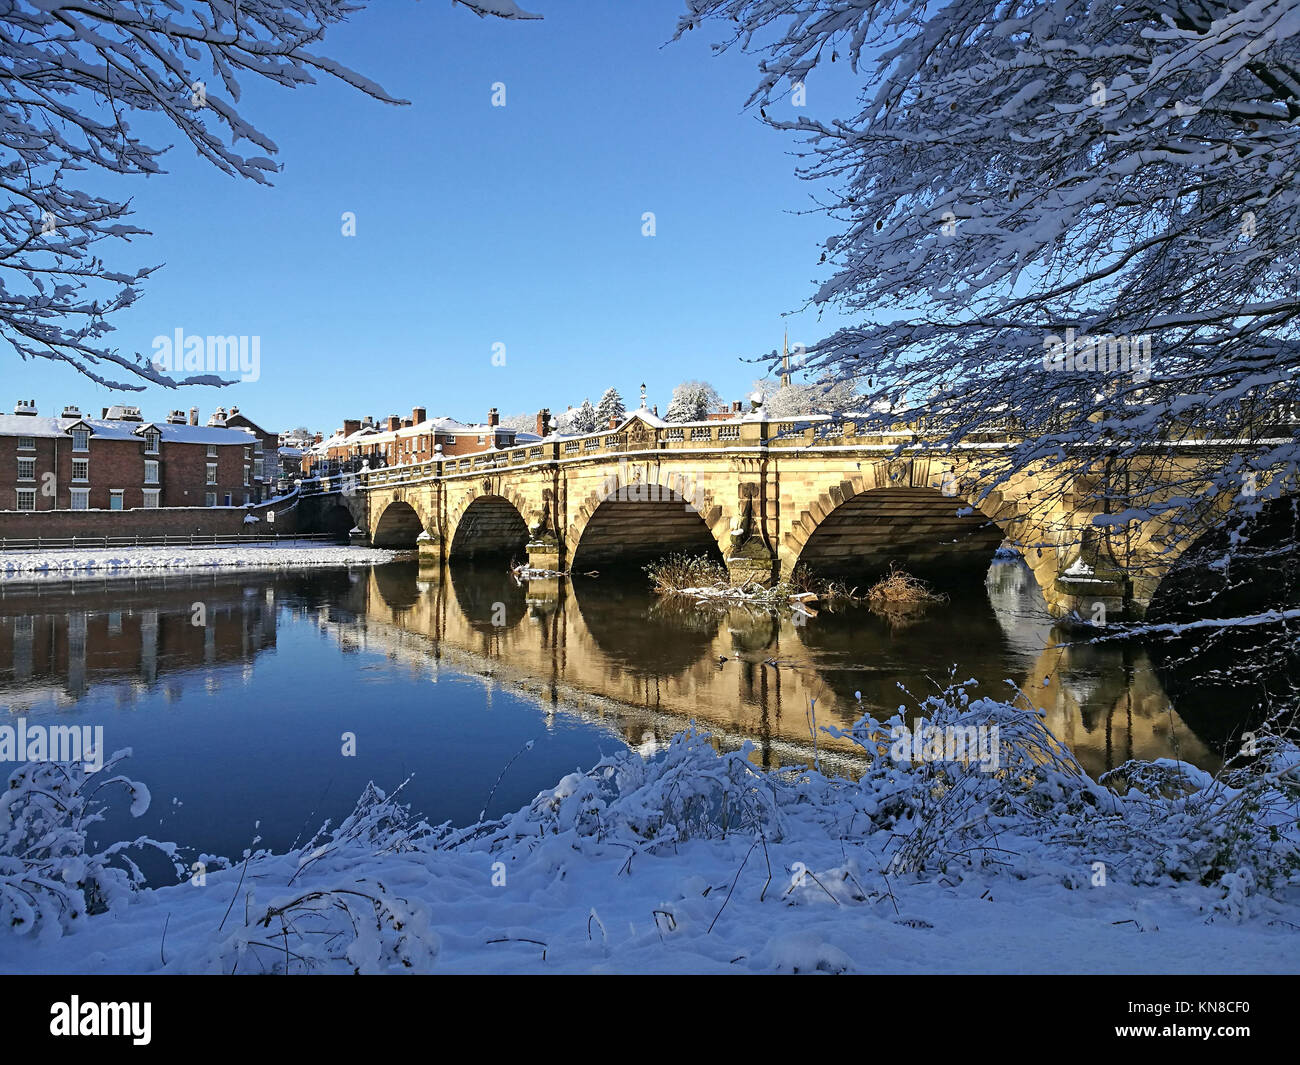 Shrewsbury, Shropshire, UK. 11th December 2017. The River Severn and English Bridge look very wintry on Monday 11th December, the day after heavy snowfall and an overnight freeze. The temperature was recorded at -4 degrees. Stock Photo